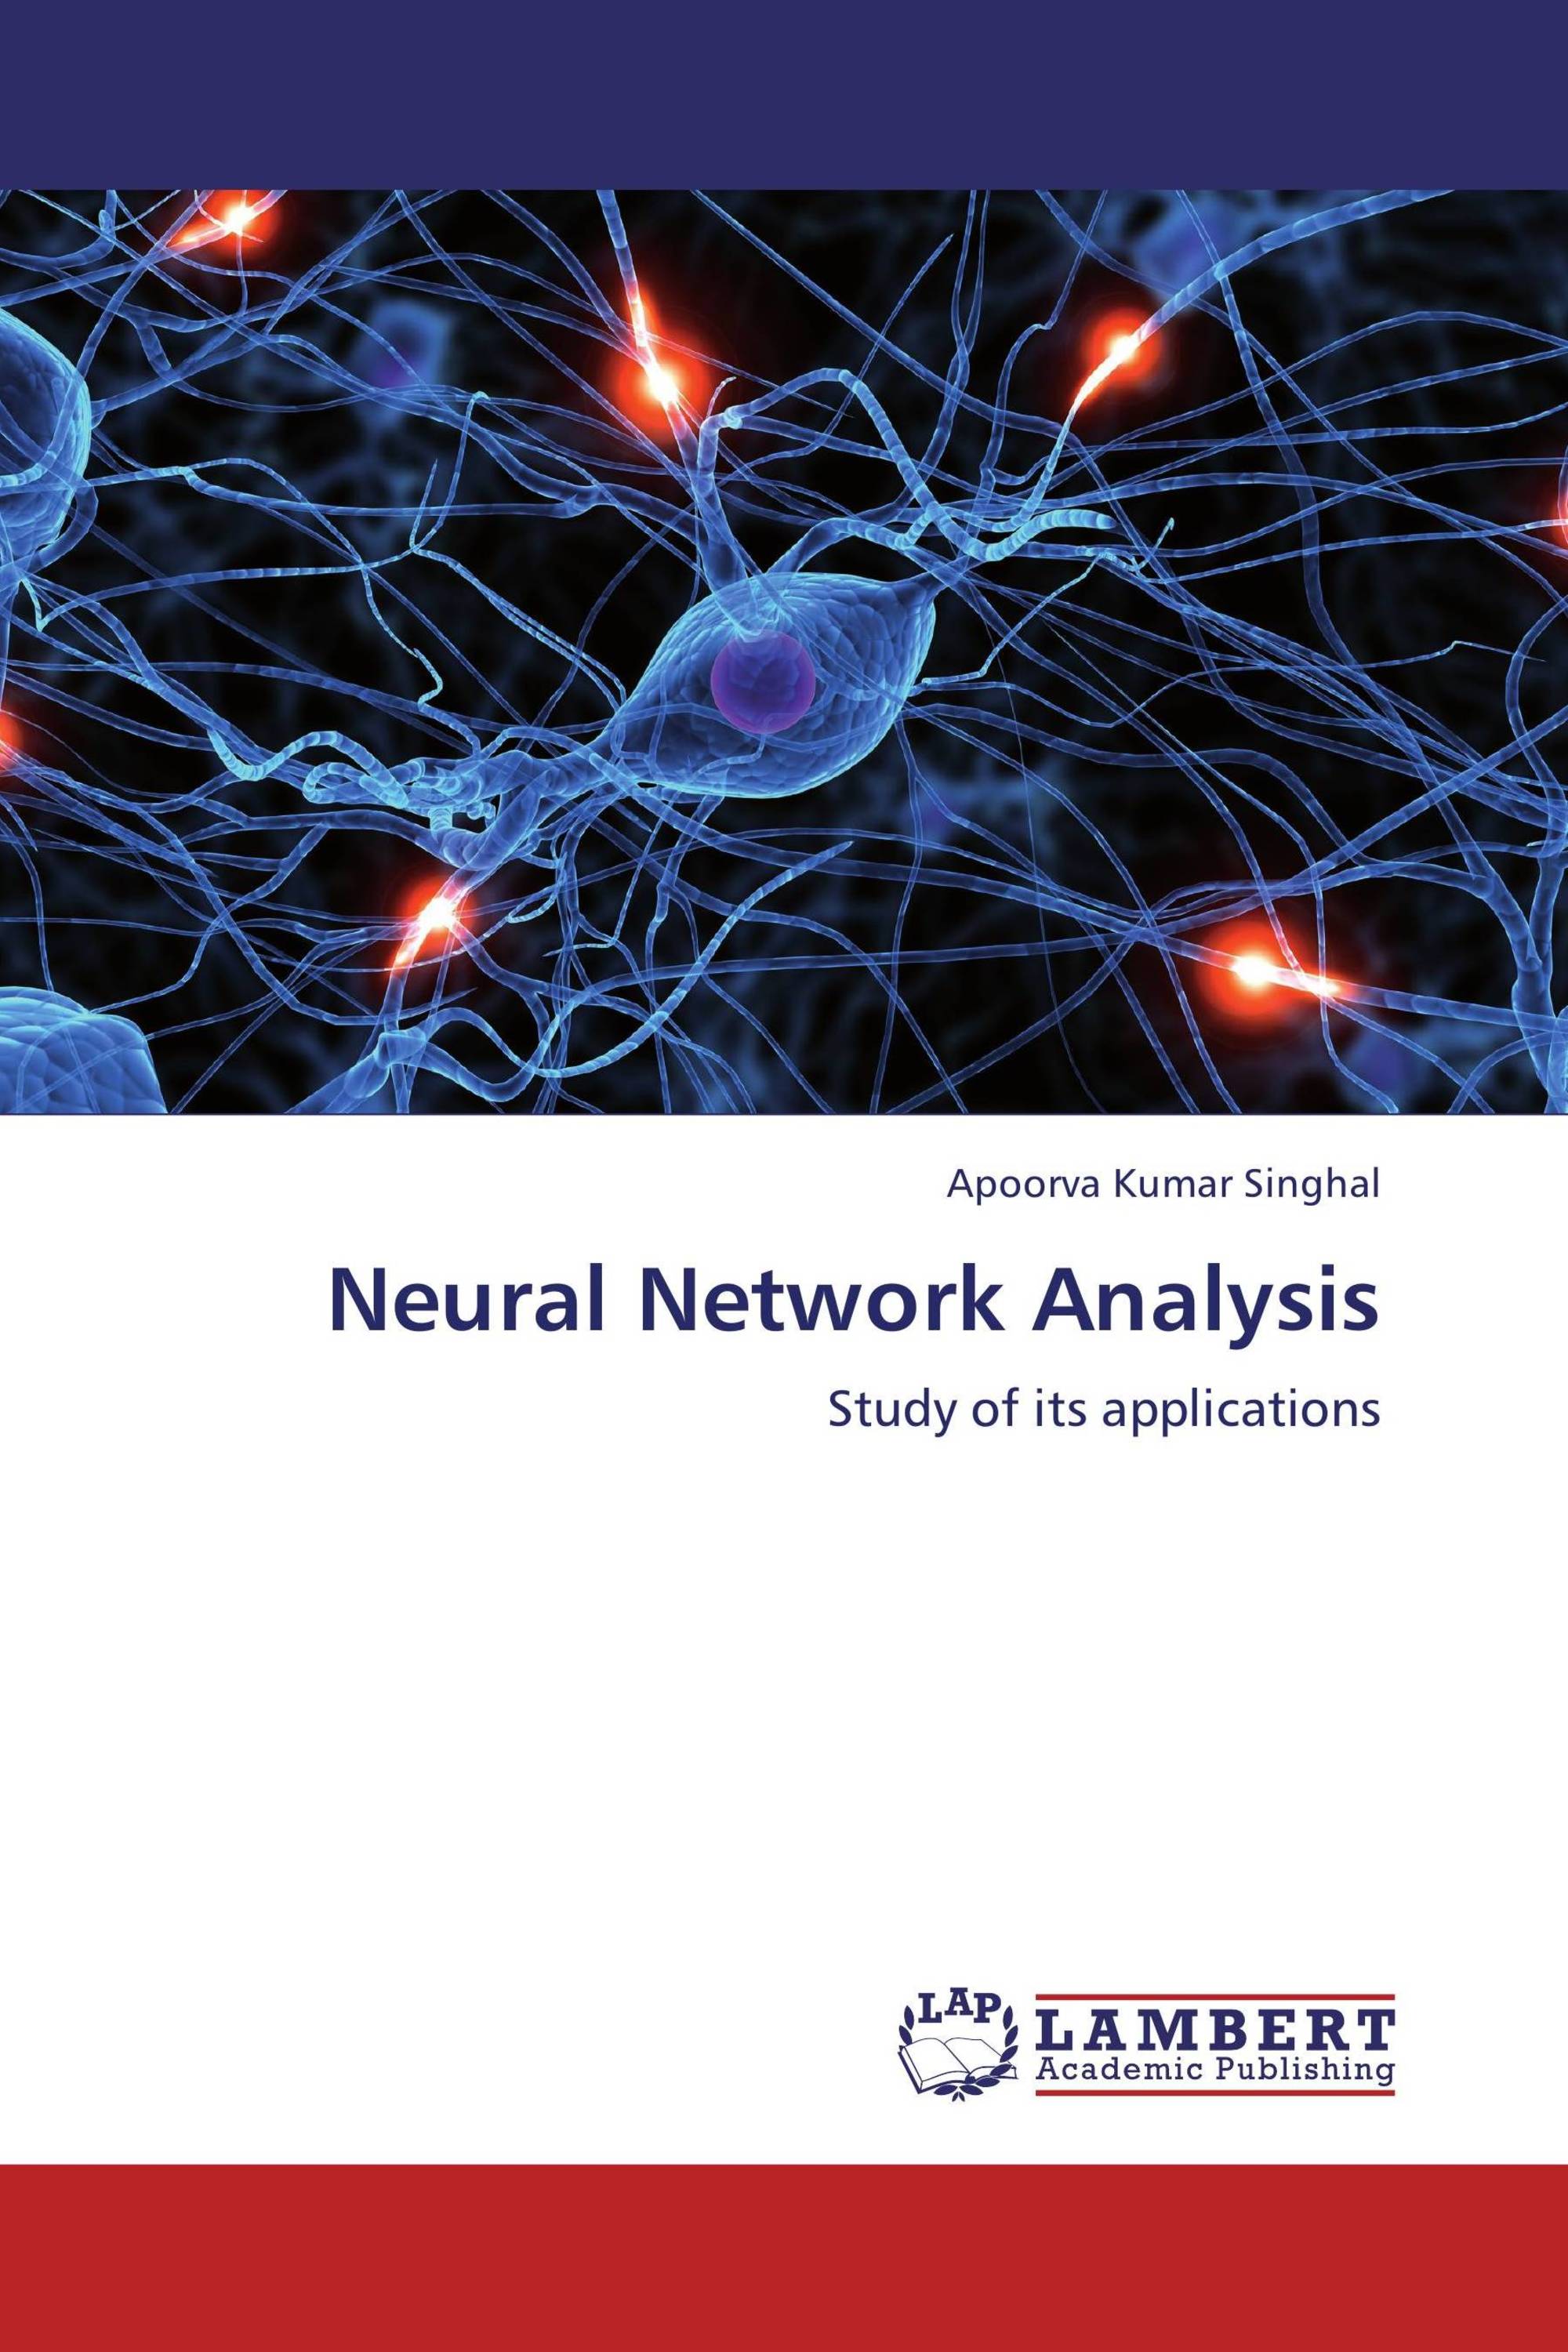 case studies in neural data analysis a guide for the practicing neuroscientist